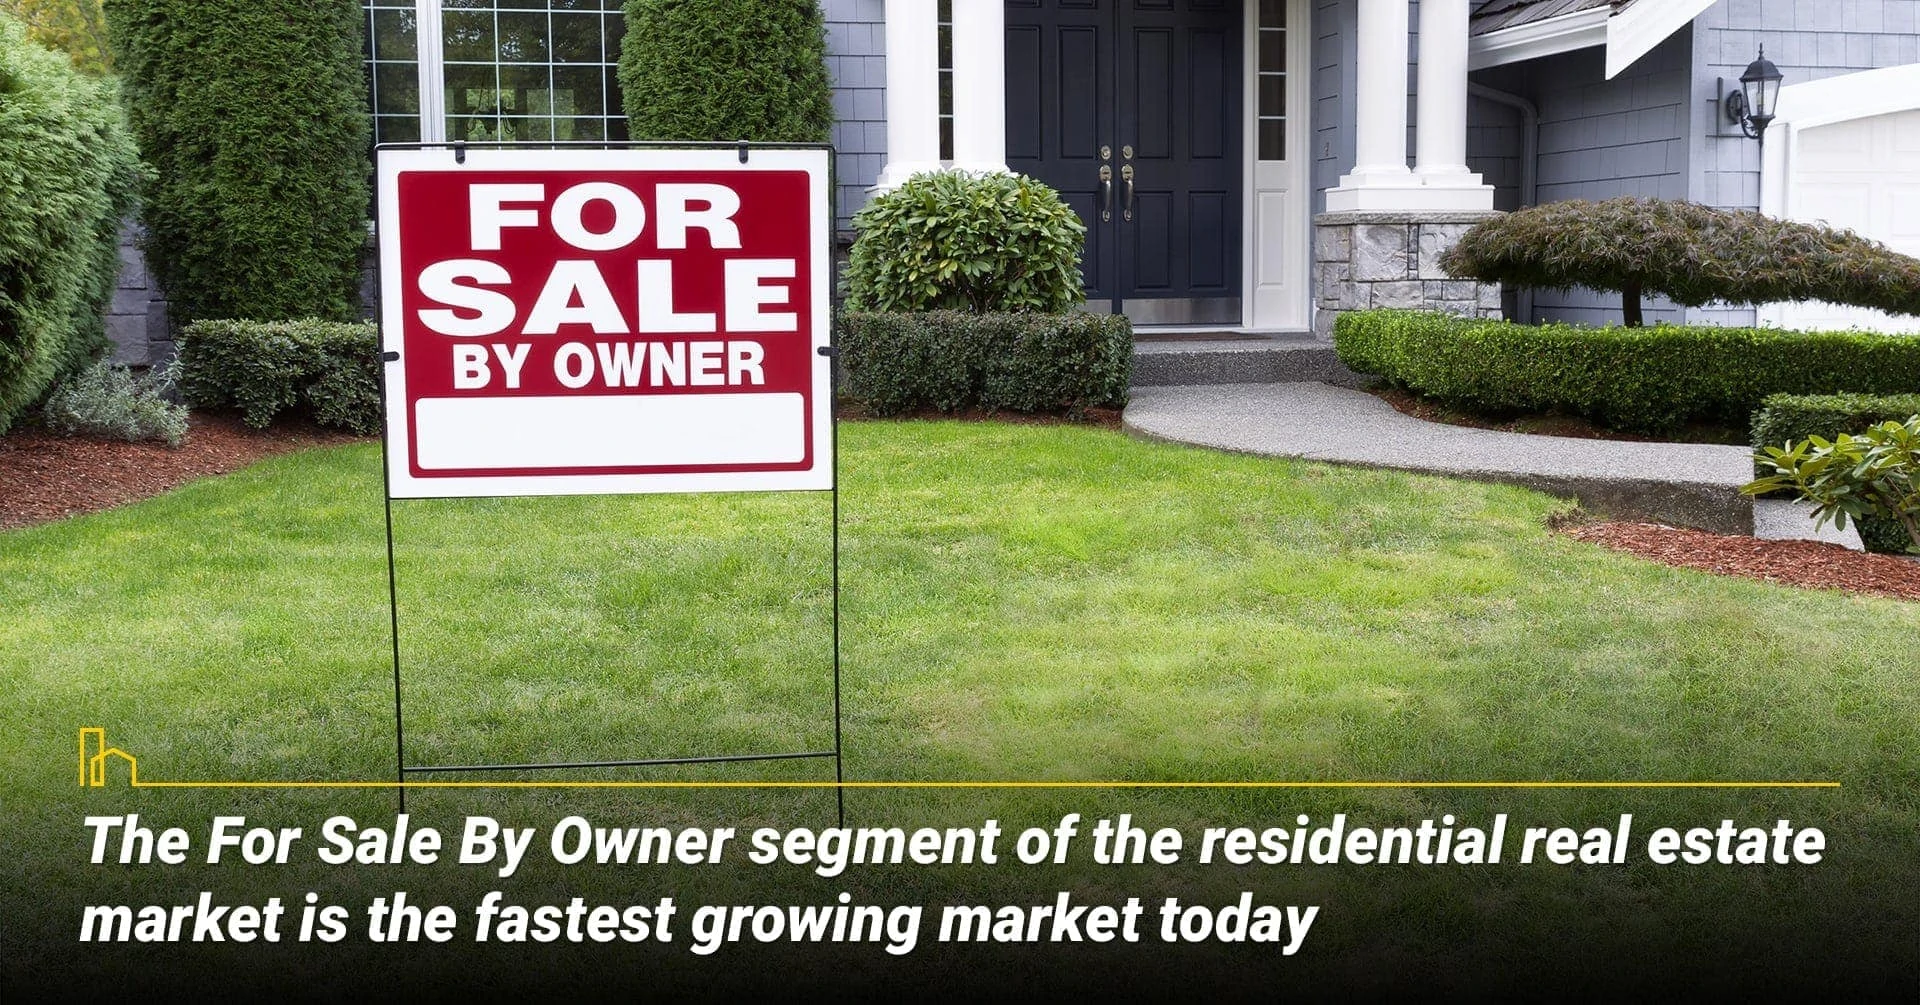 The For Sale By Owner segment of the residential real estate market is the fastest growing market today. More and more people are selling their own home